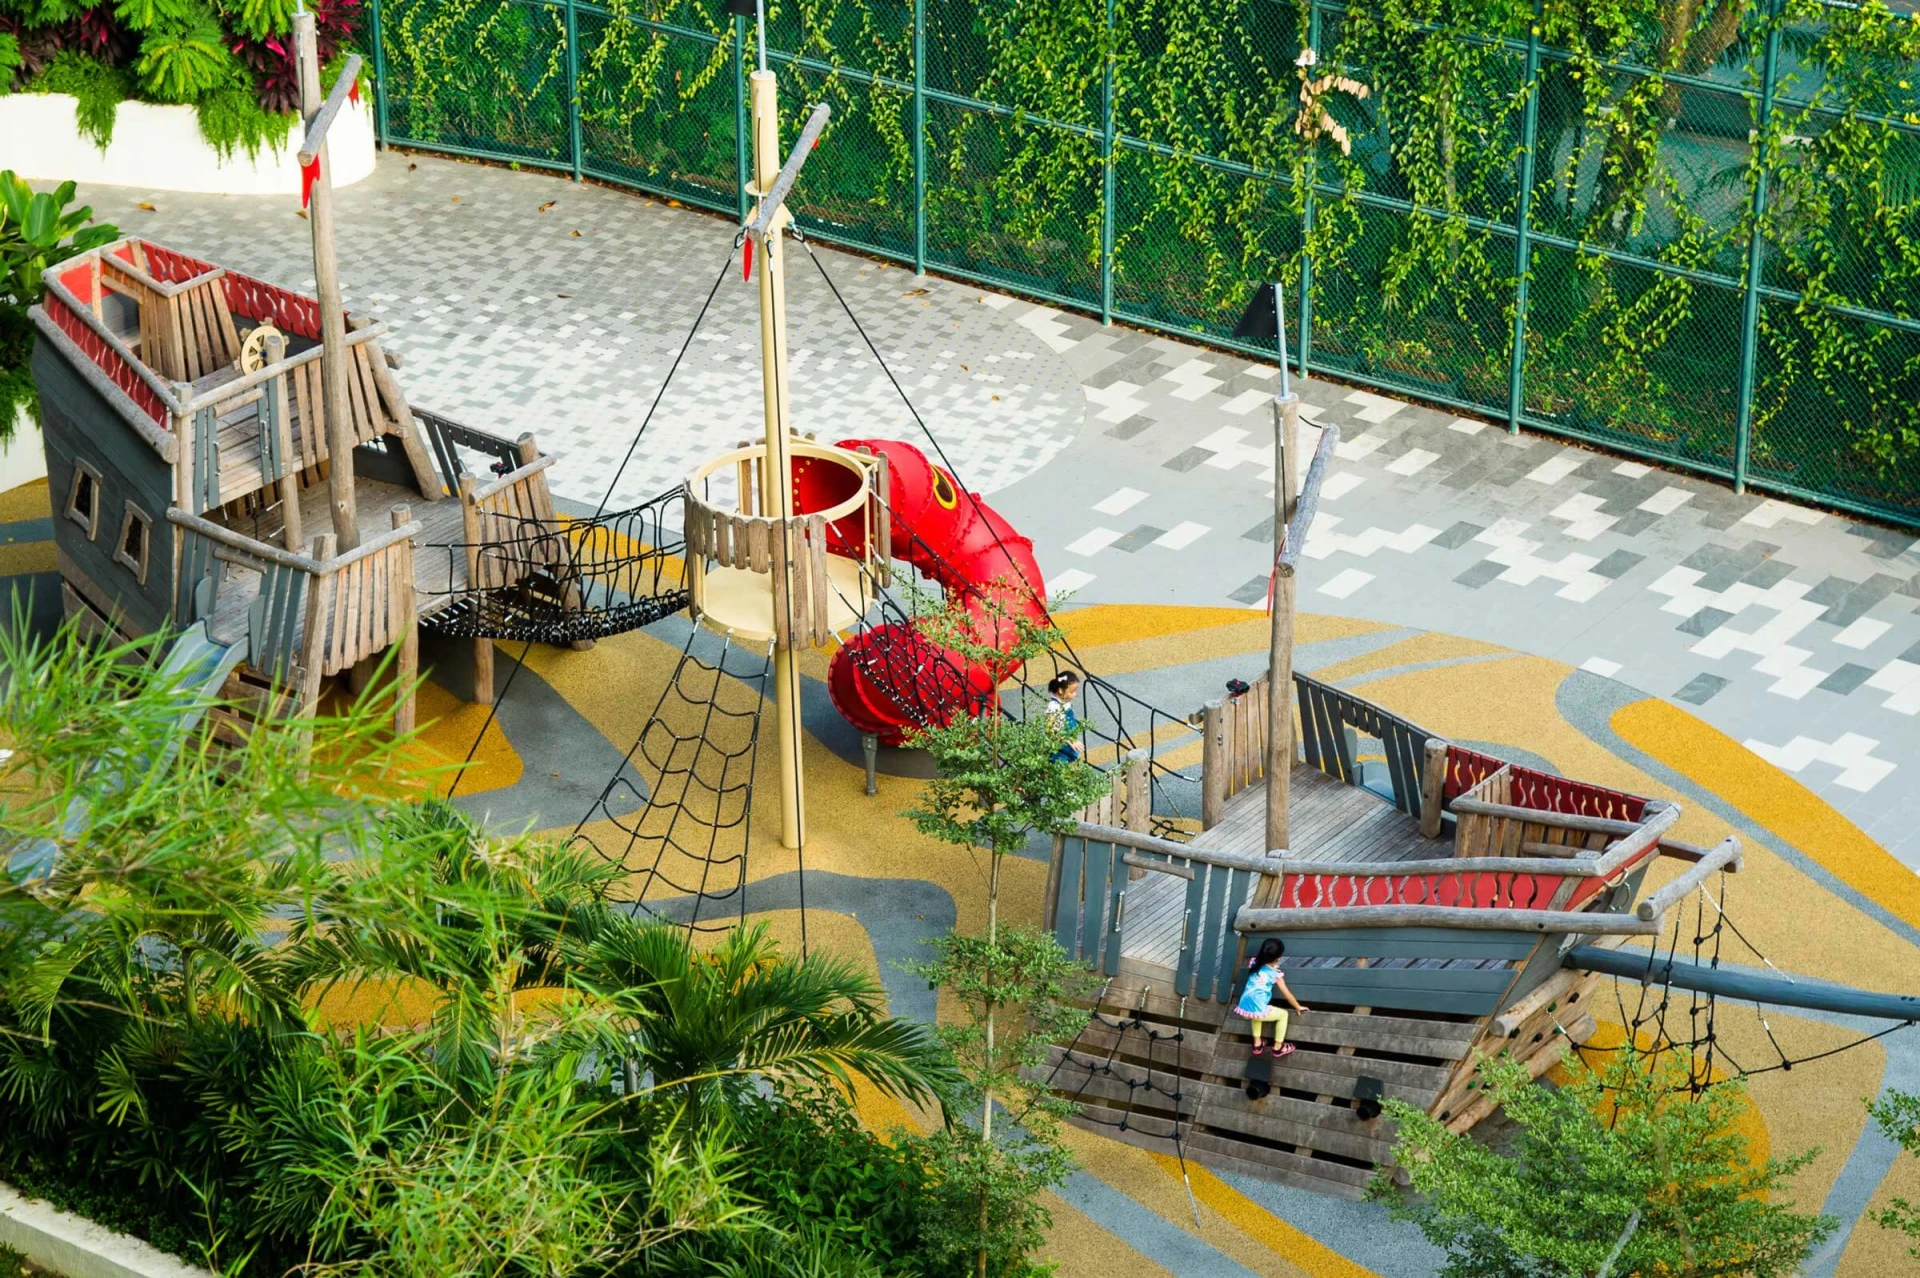 Wooden large playground ship at Shangri-La Hotel hotel in Singapore